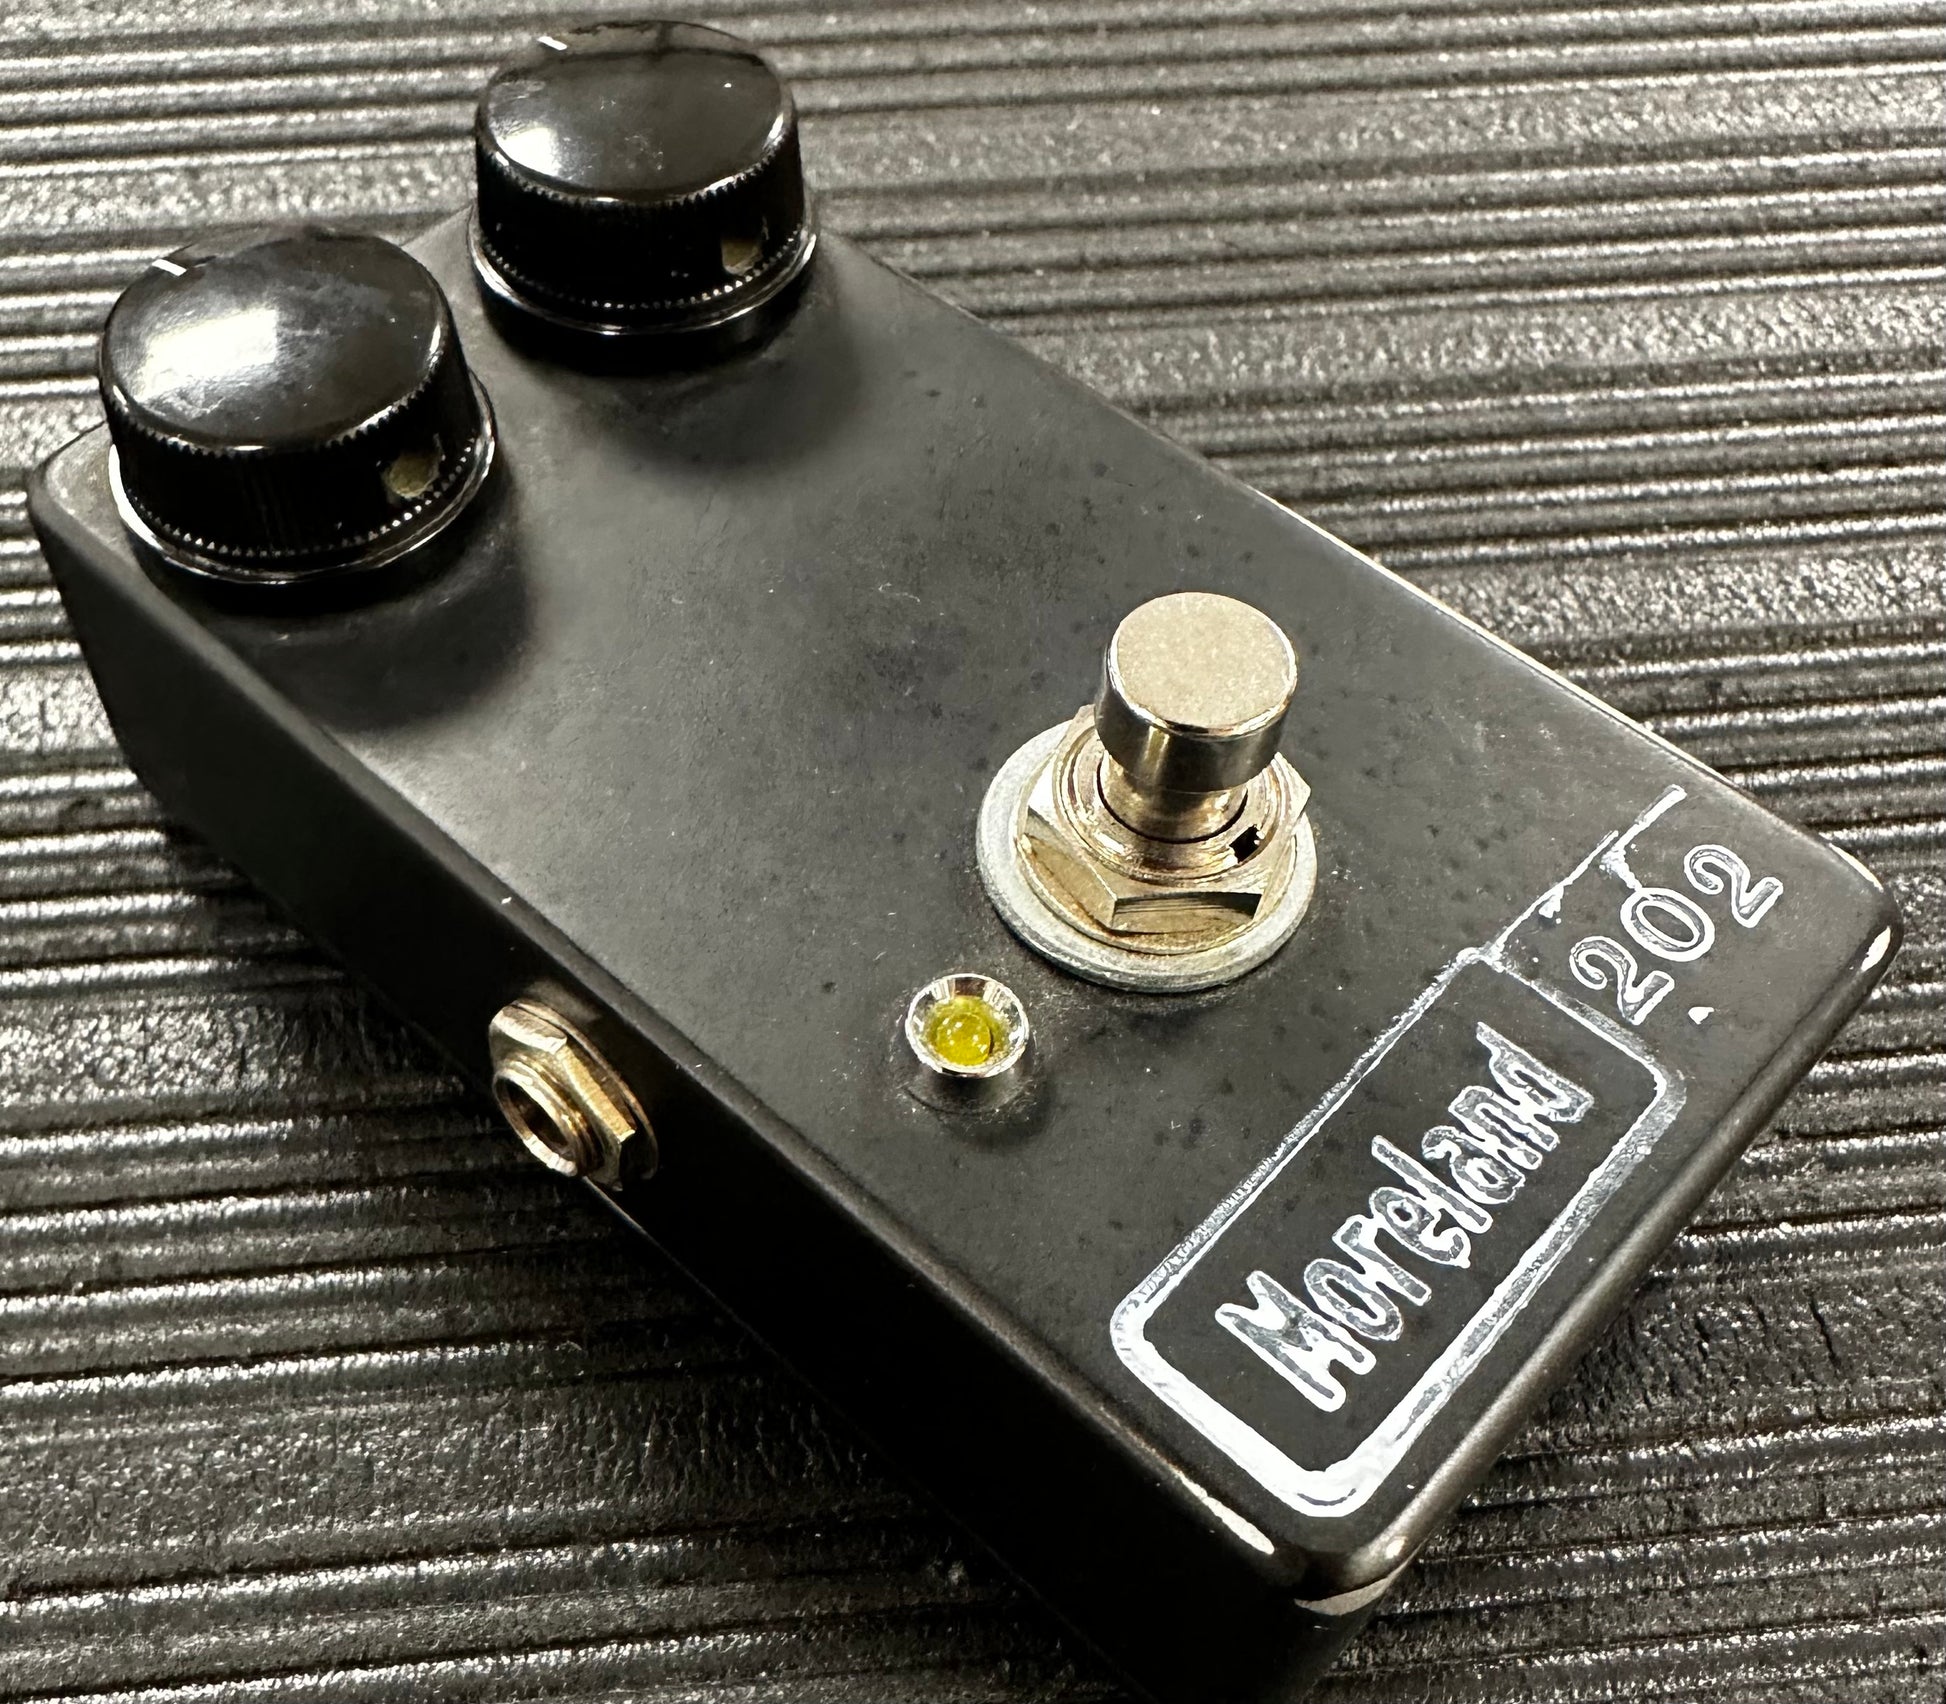 Top angle of Used Moreland Magnetics 202 Distortion Pedal #5 of 5 TSS2813.